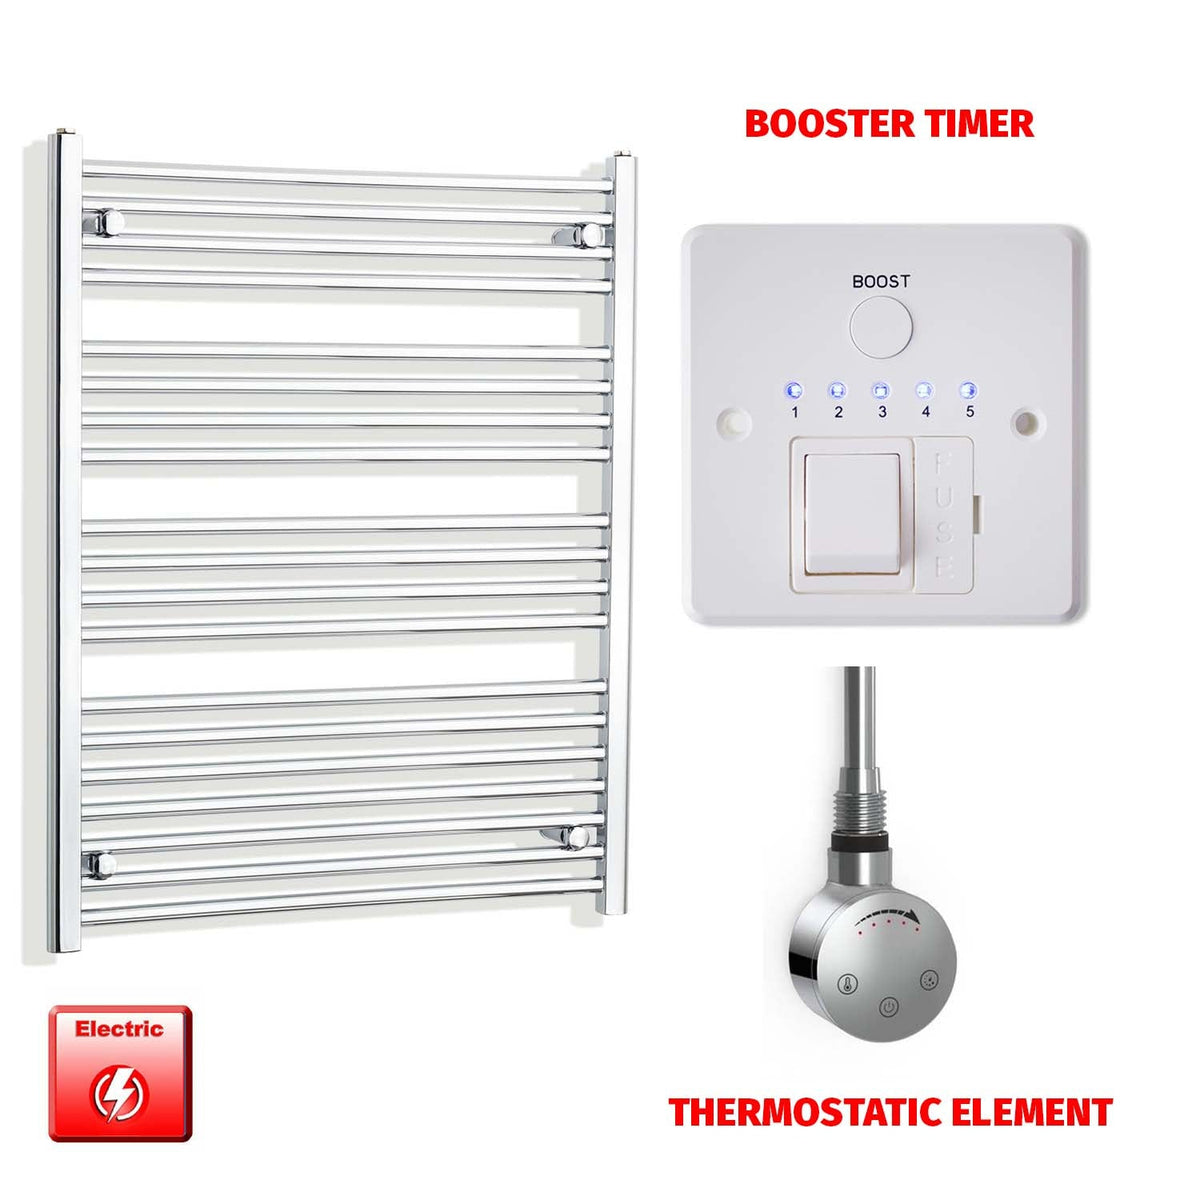 1000 x 800 Pre-Filled Electric Heated Towel Radiator Straight Chrome SMR Thermostatic element Booster timer